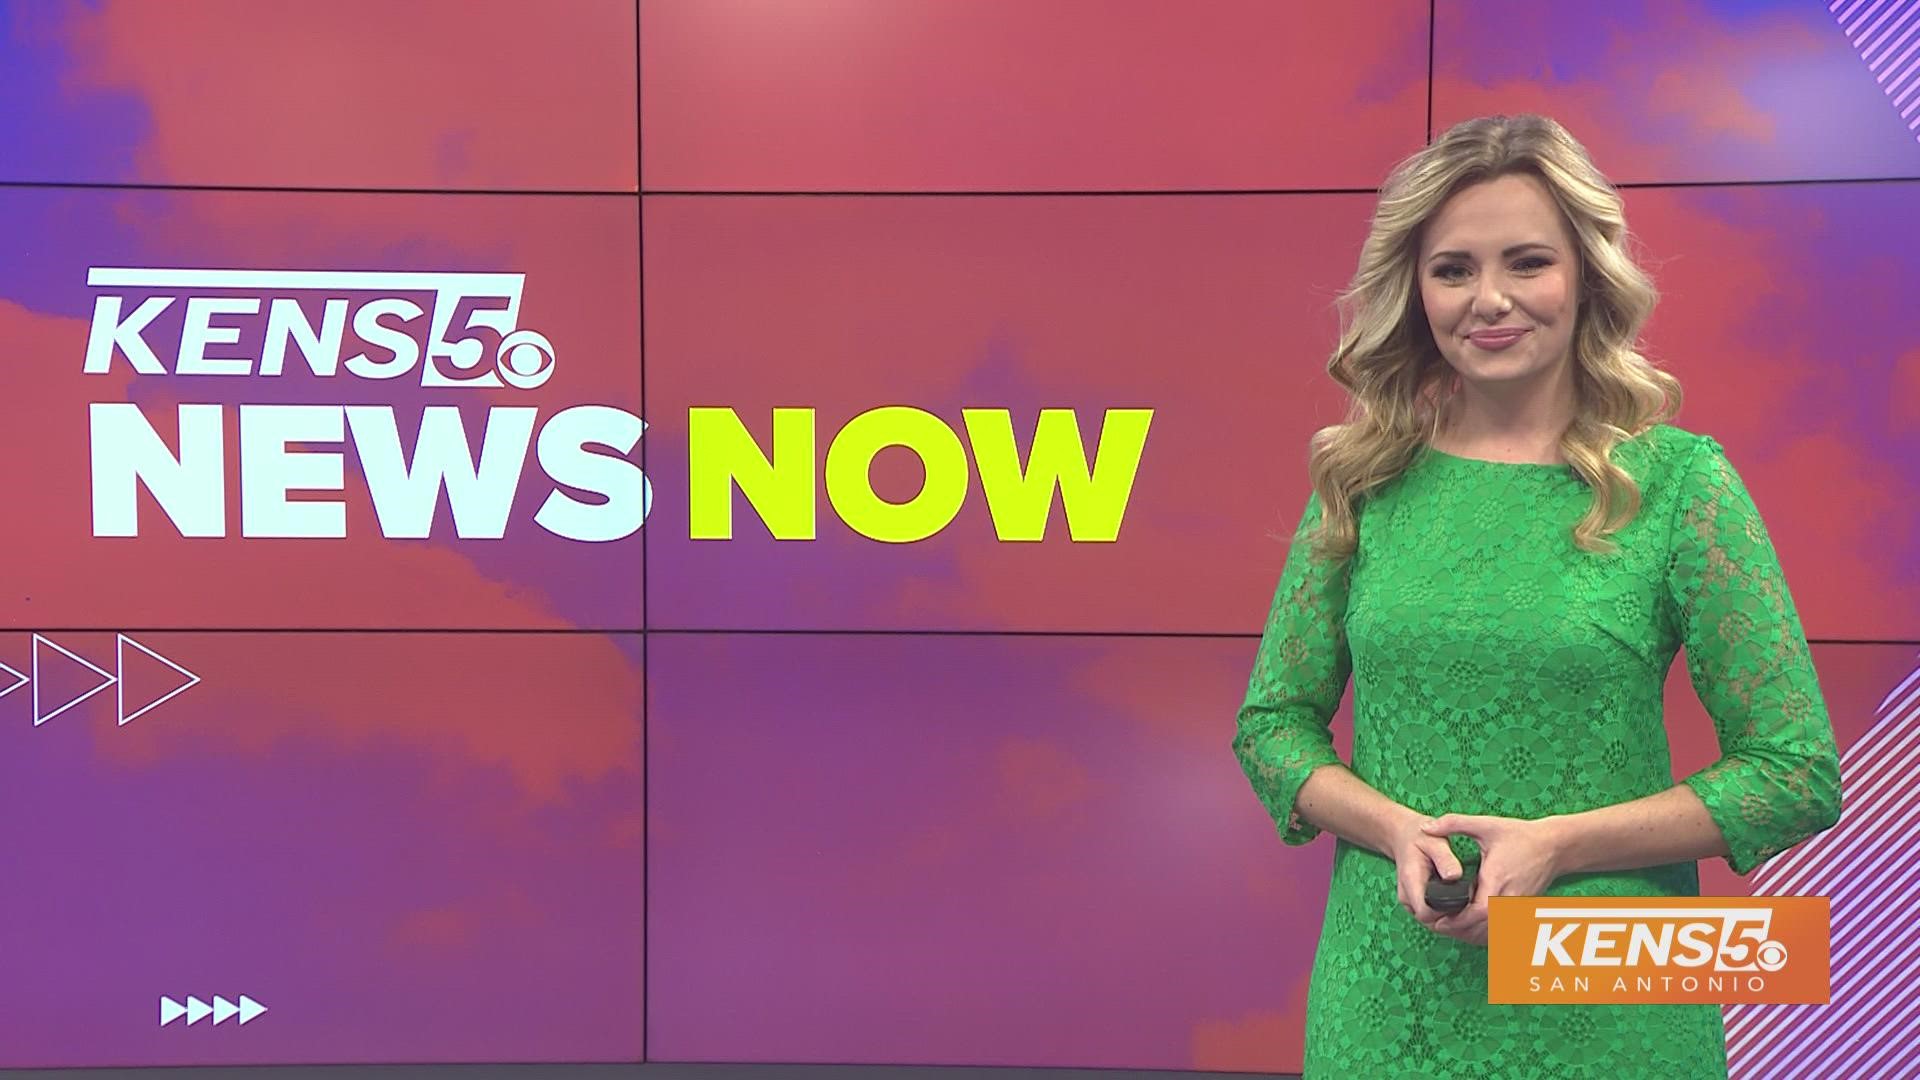 Follow us here to get the latest top headlines with the KENS 5 morning team every weekday Monday through Friday!